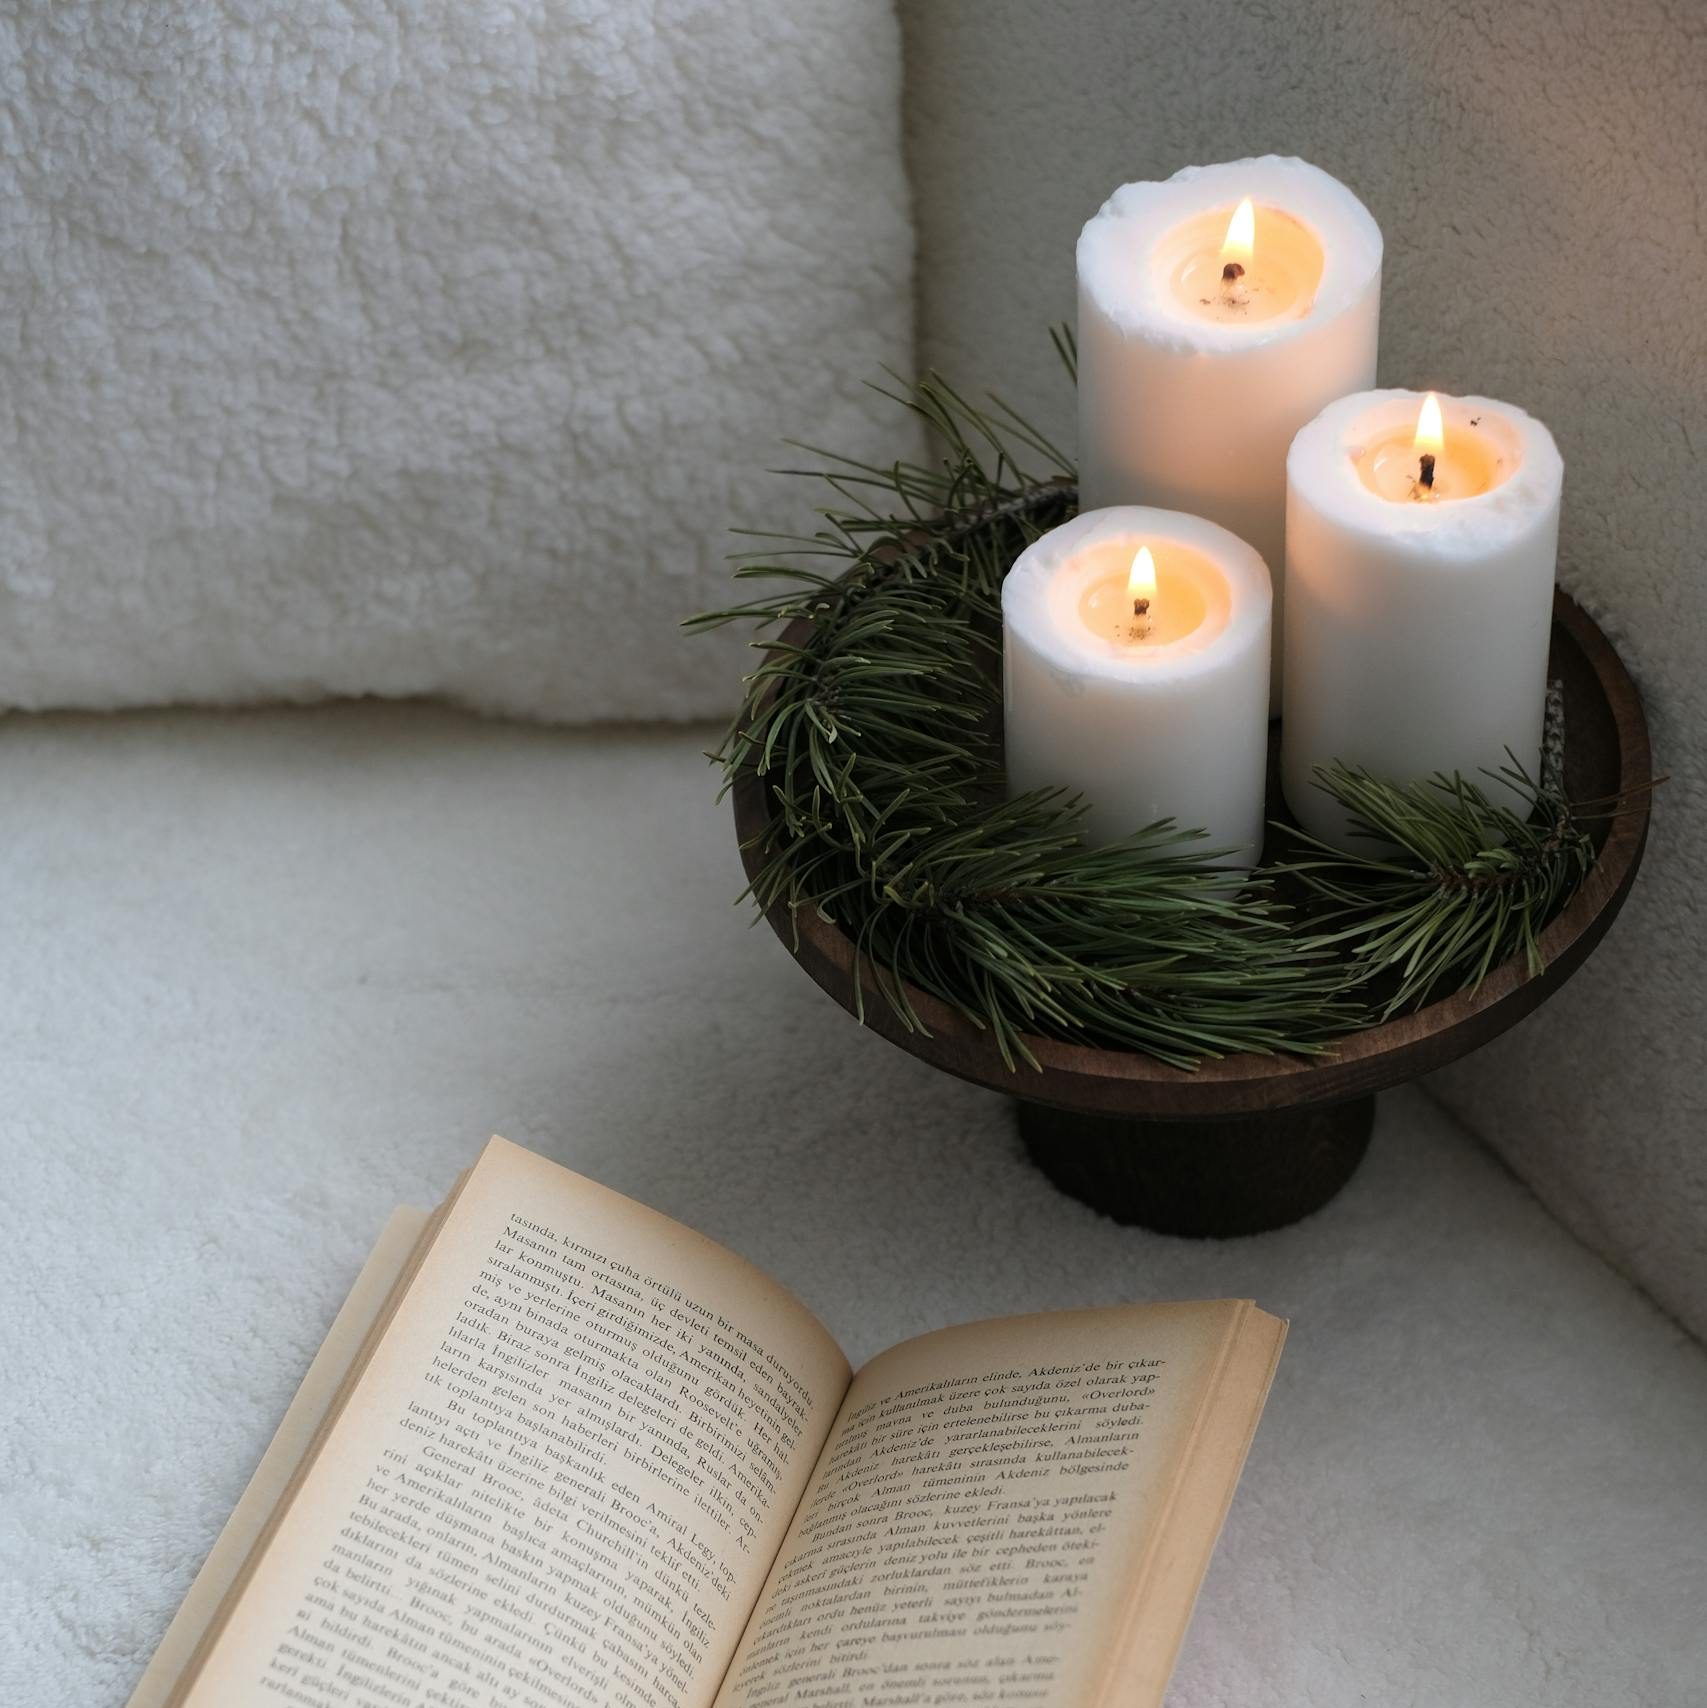 A book and clean burning candles on a white couch